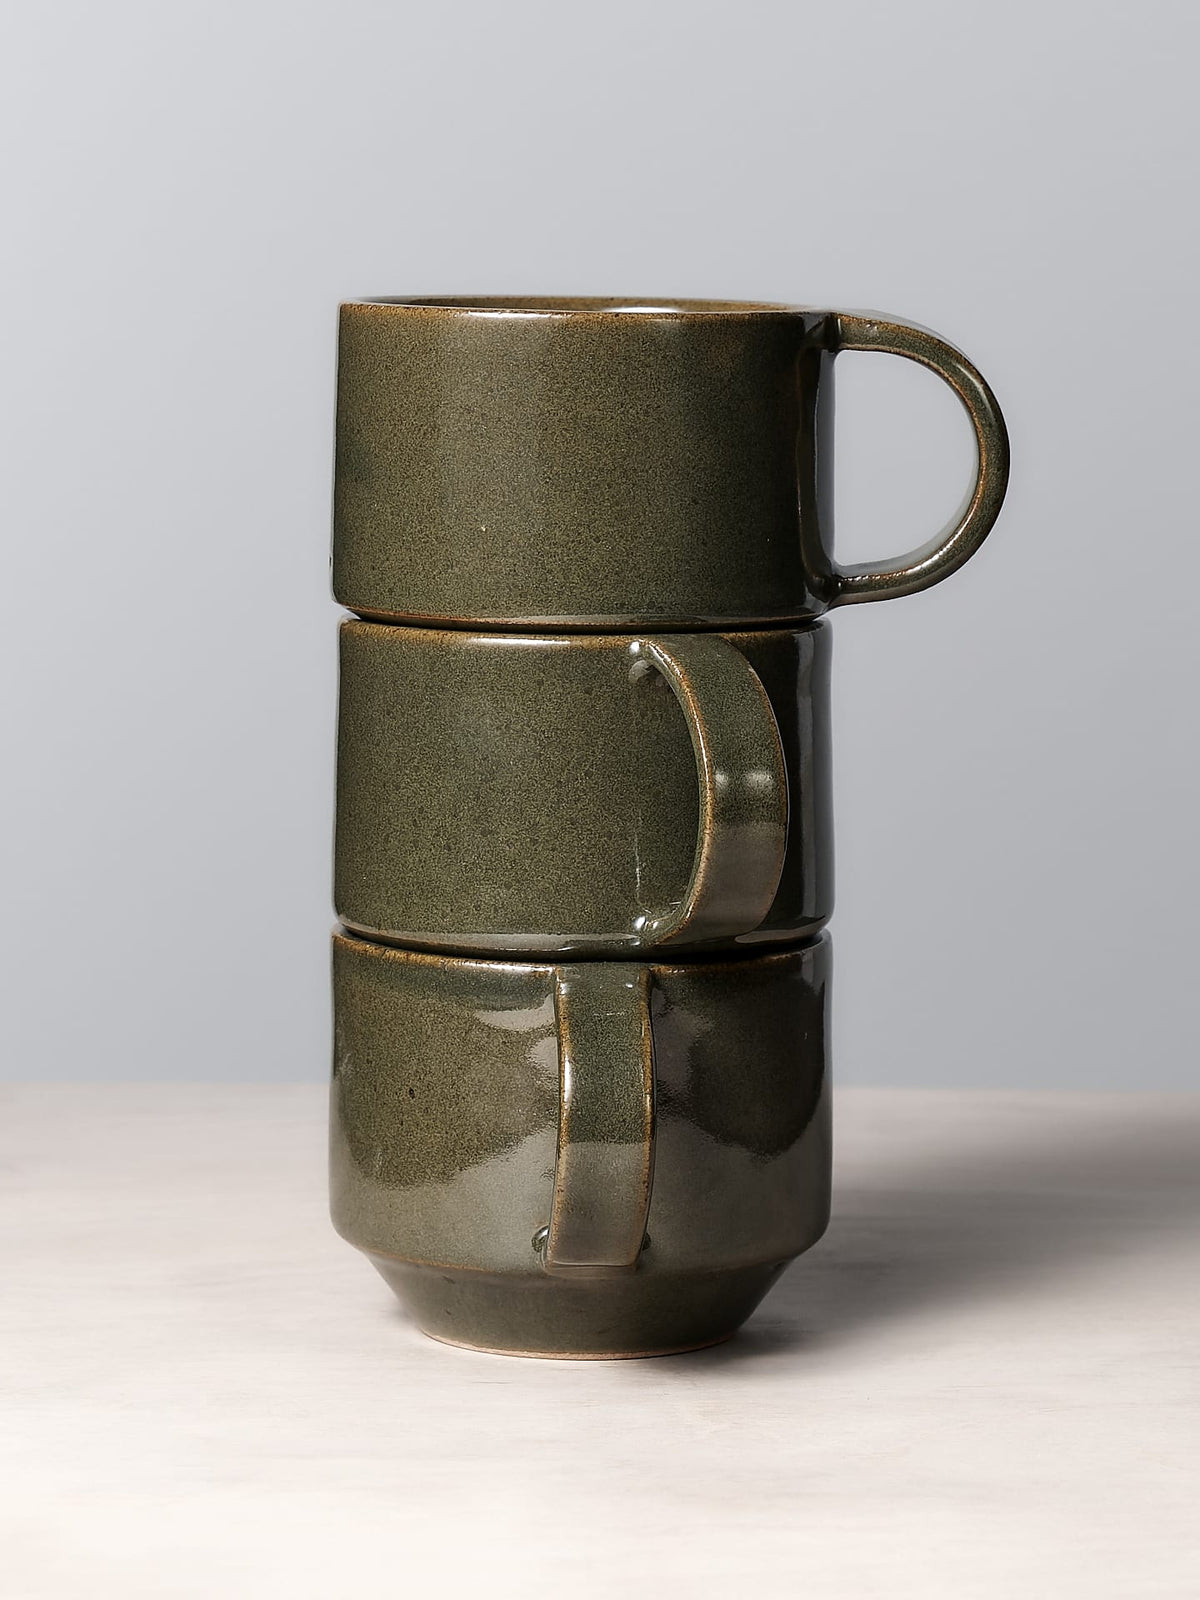 Three Richard Beauchamp C-handled Stacking Mugs - Green stacked on top of each other.